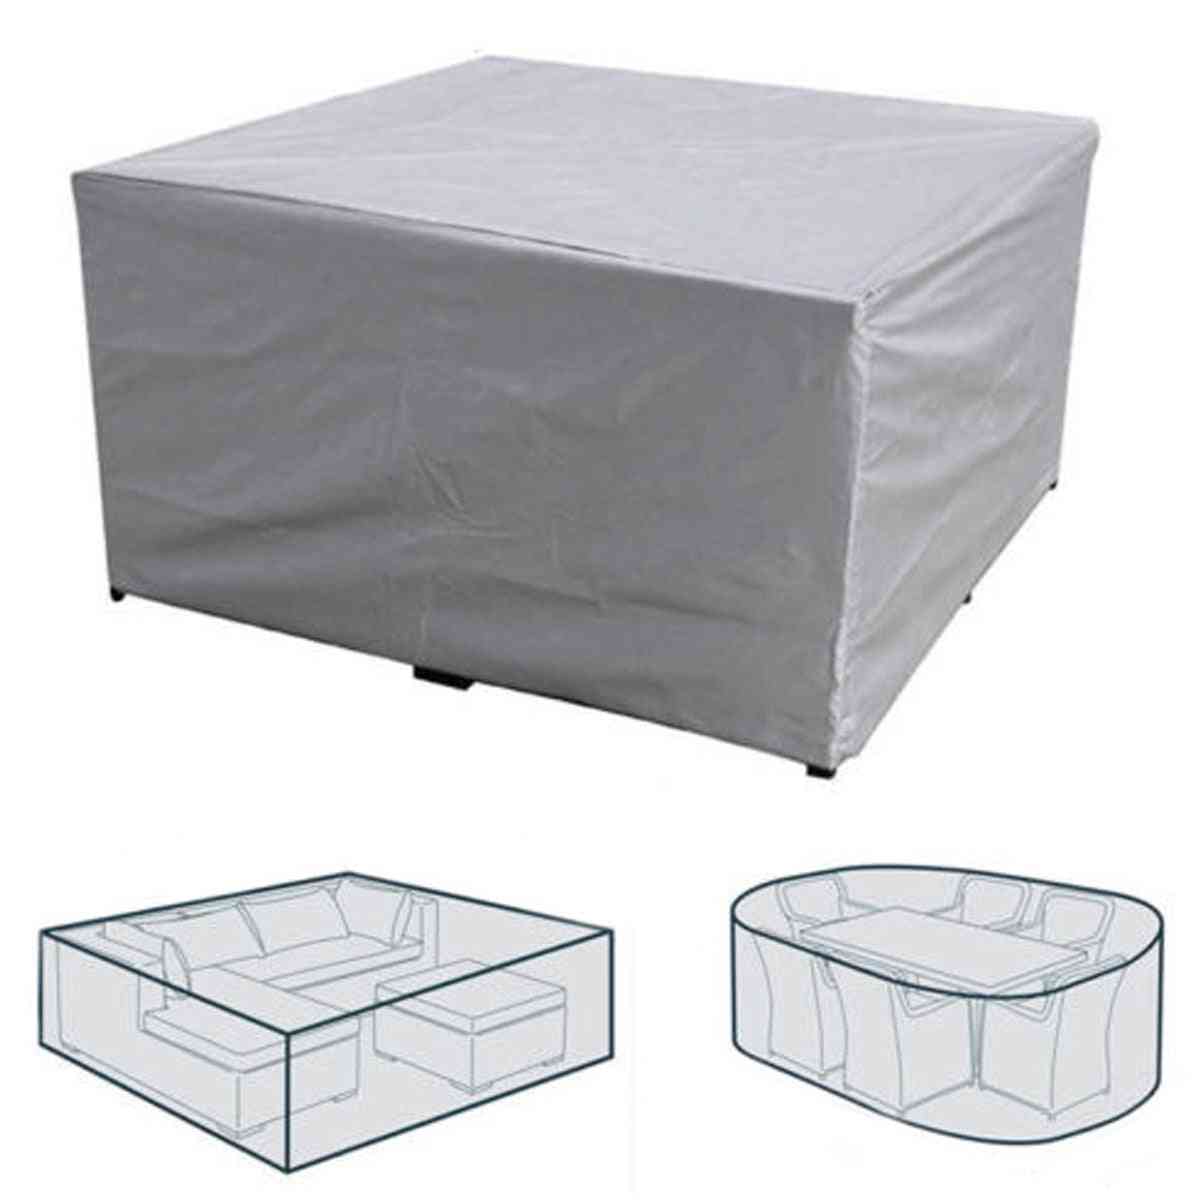 Waterproof Outdoor Garden Furniture Covers For Rain, Snow, Chair Dust Proof Cover